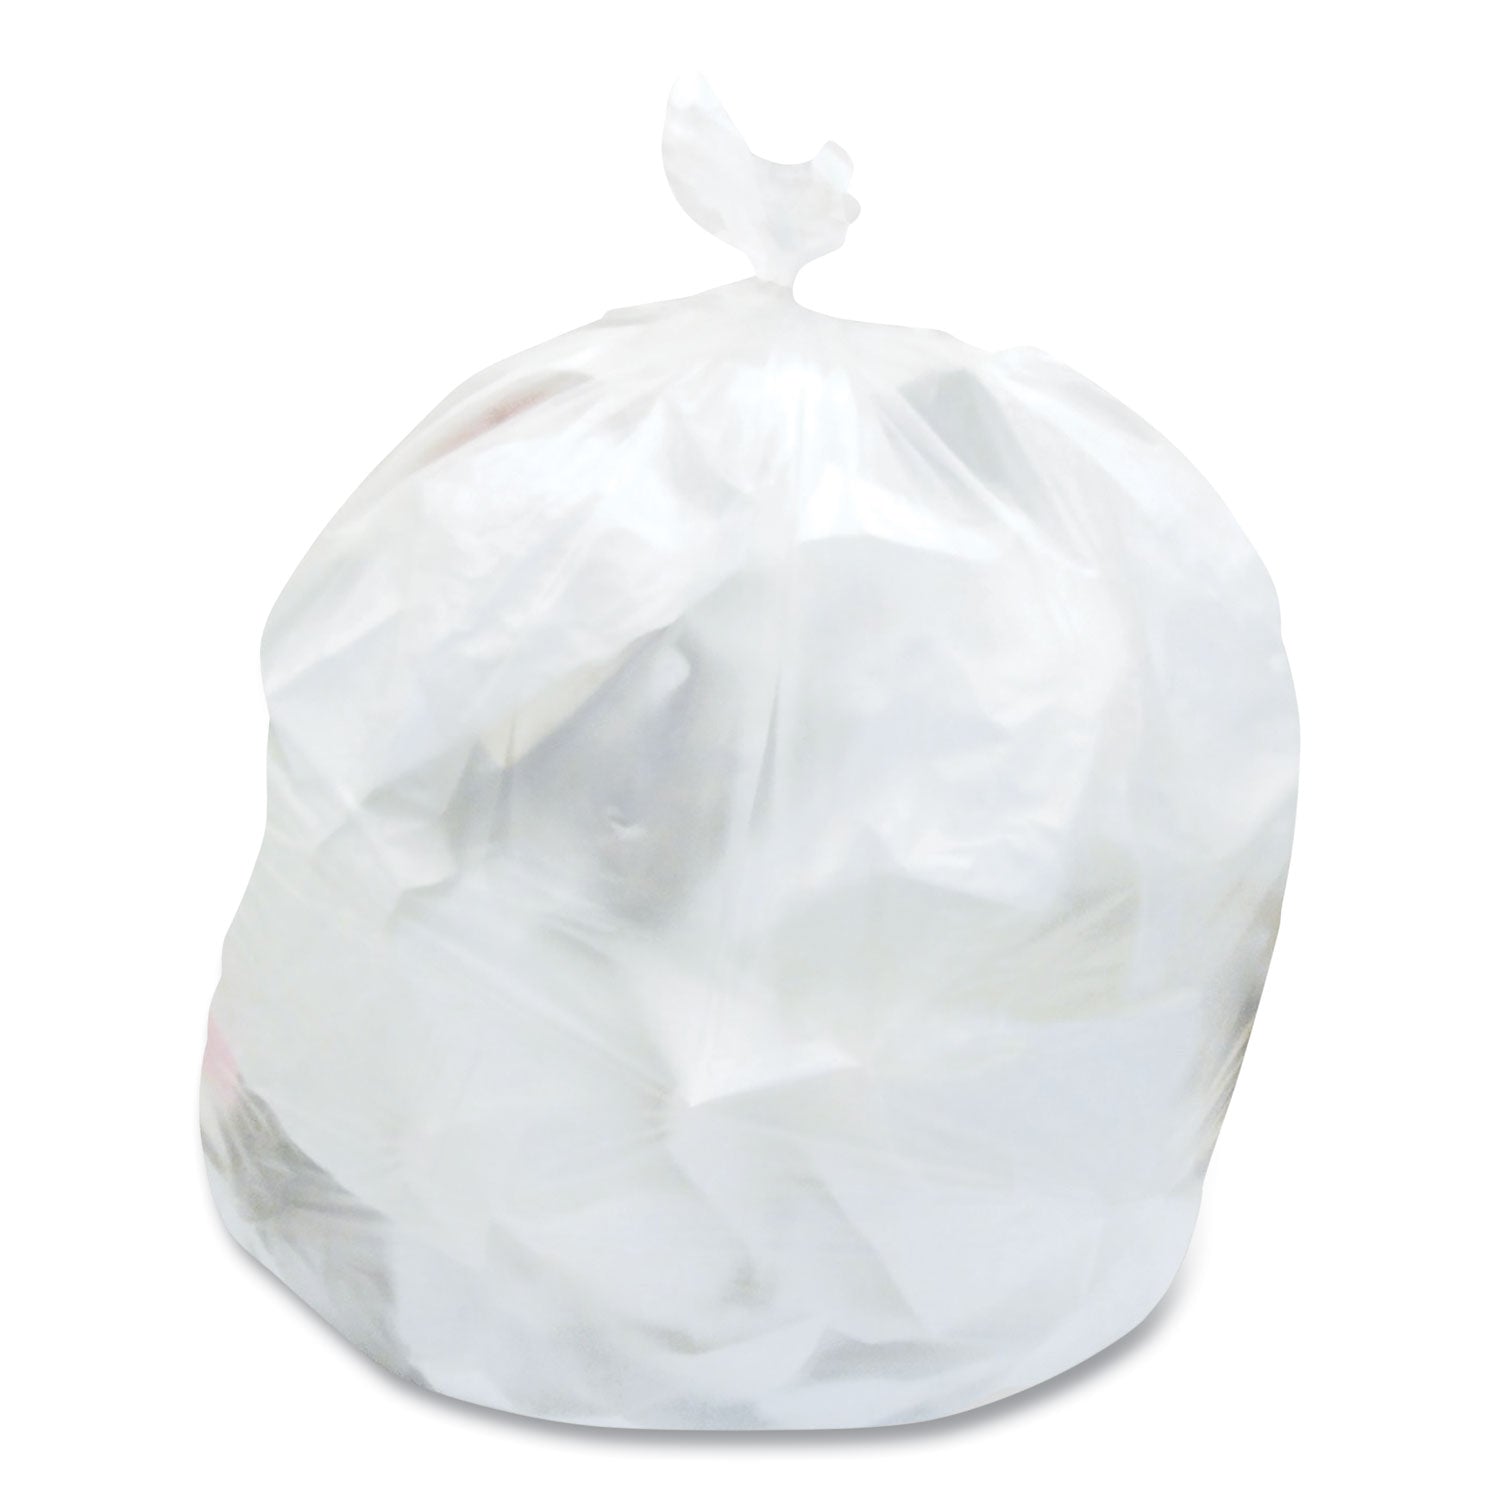 high-density-can-liners-30-gal-787-mic-30-x-37-clear-25-bags-roll-20-rolls-carton_cwz1483190 - 2